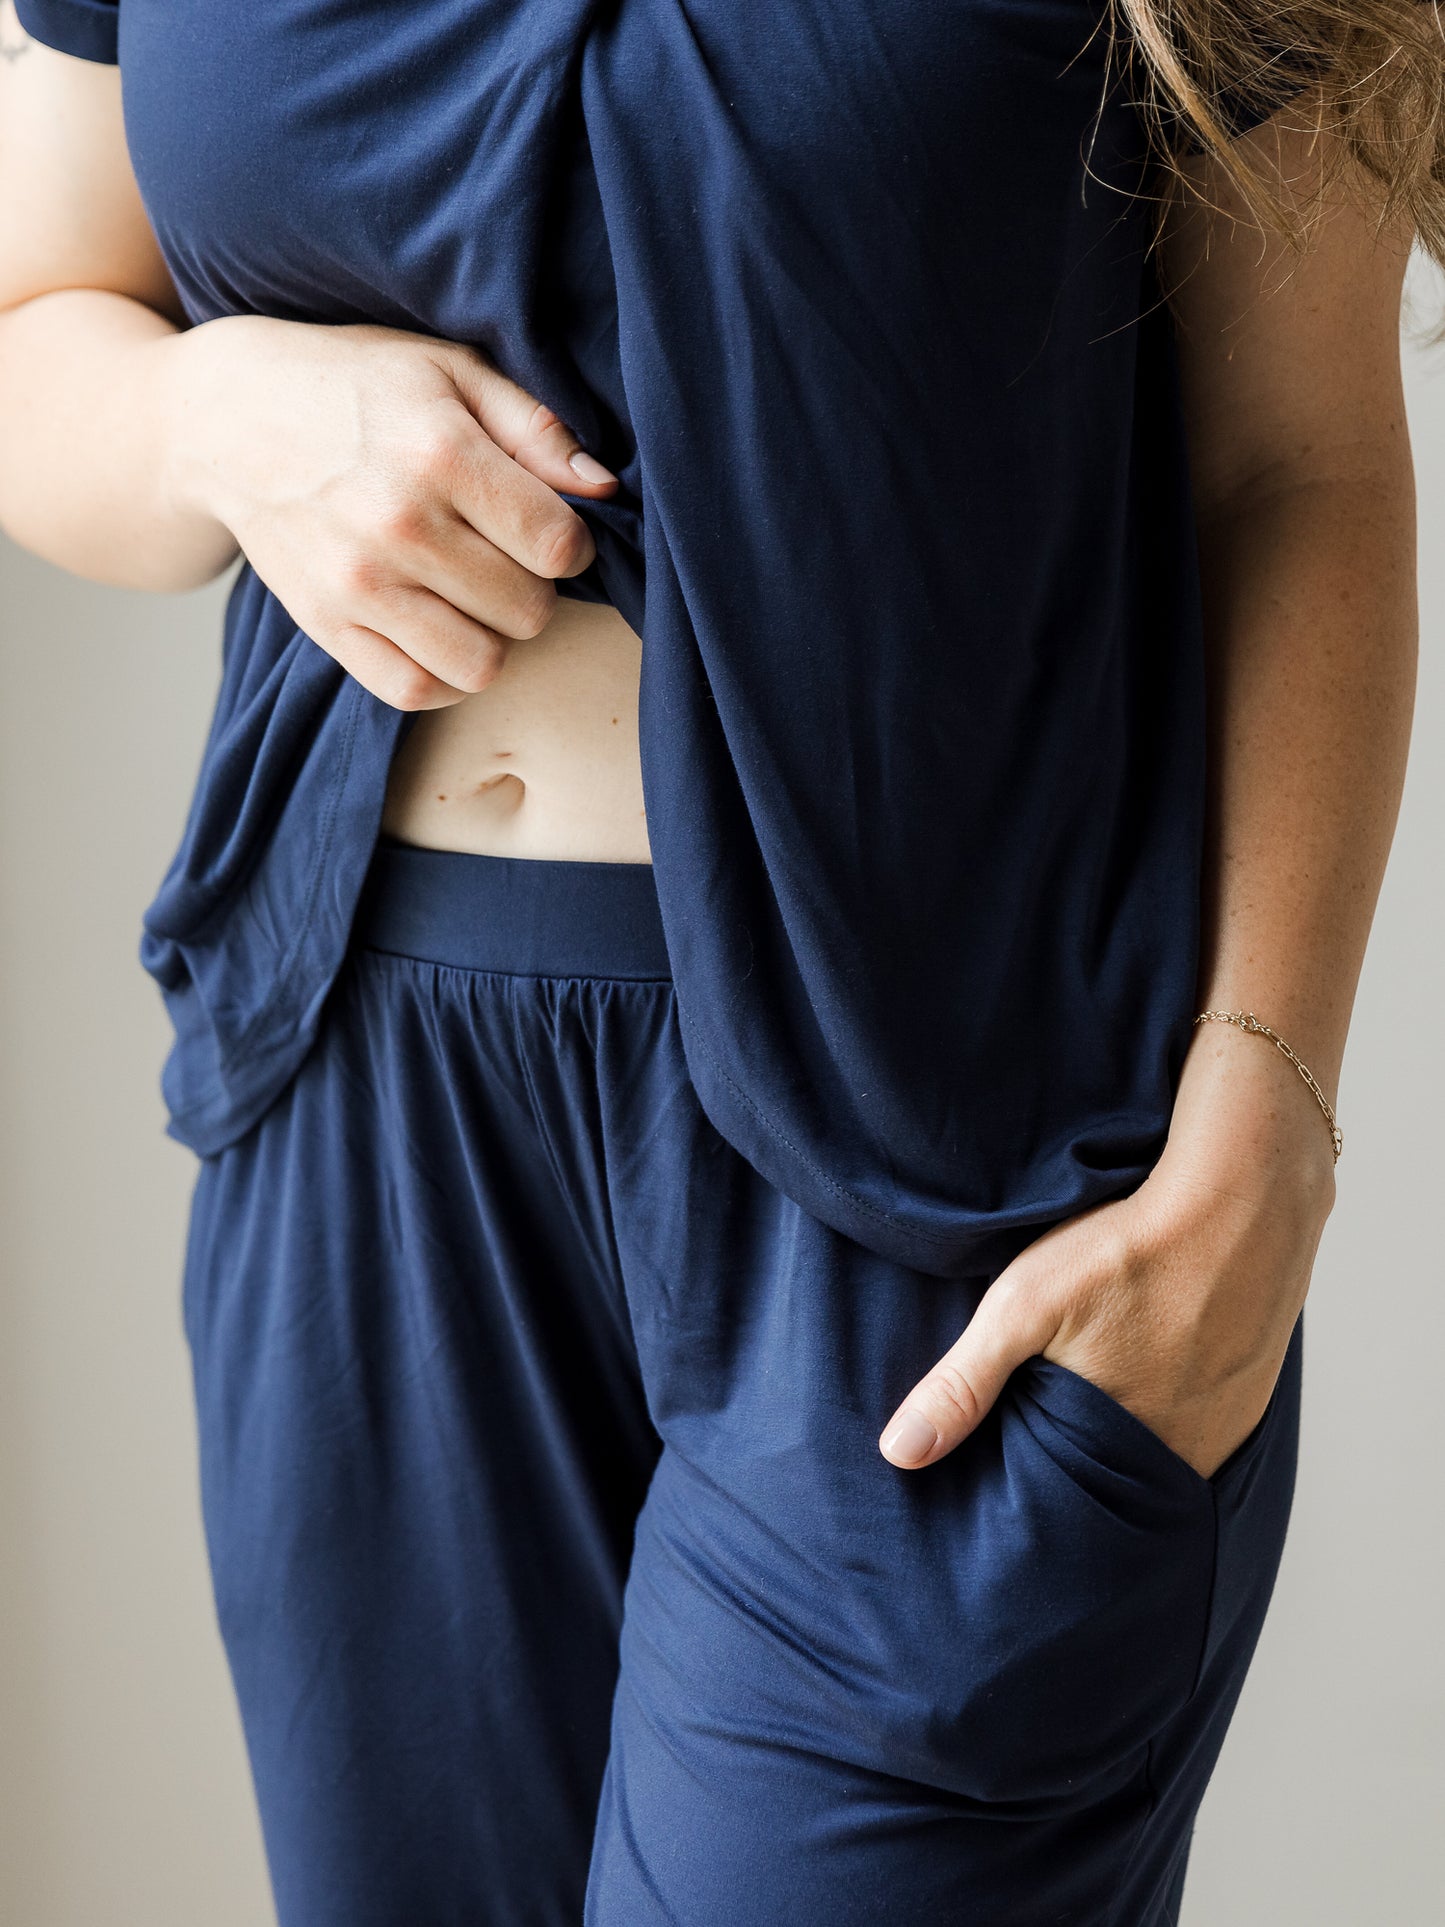 Cropped in image of model wearing a Short Sleeve Tulip Hem Maternity Pajama set - Top & Bottom in Navy Blue, showing waistband, with one hand in pocket.